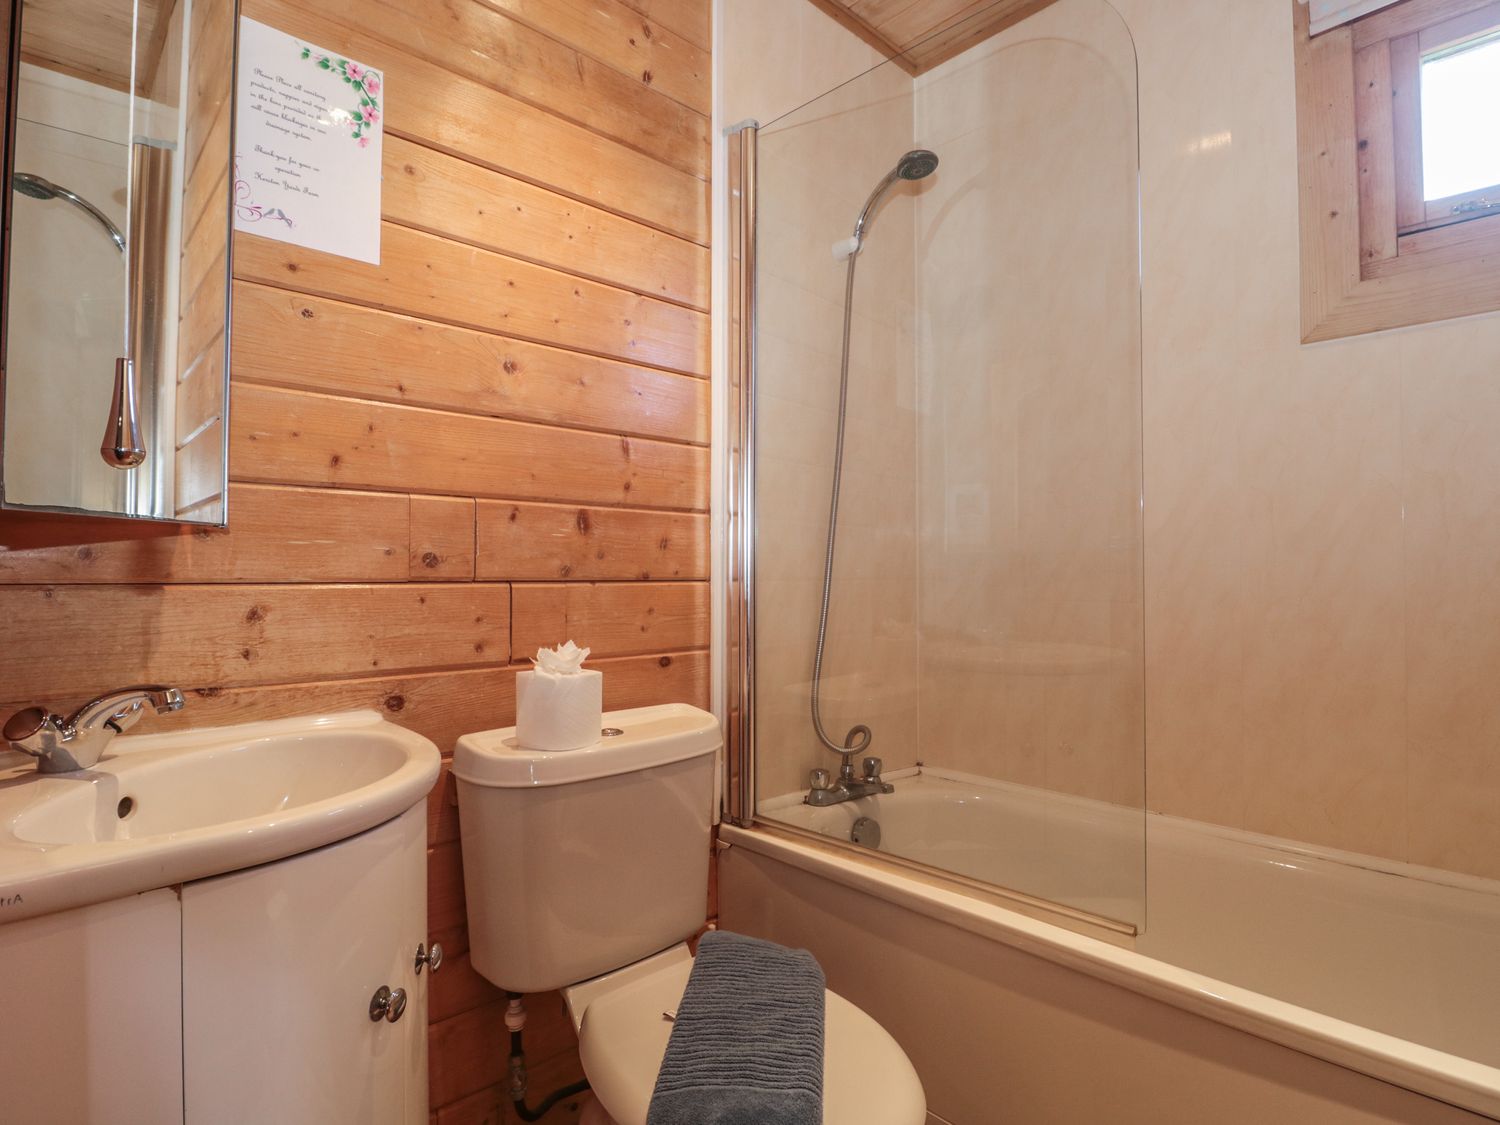 Cherry, Swanage, Dorset, In the Dorset Area of Outstanding Natural Beauty, Open plan, Hot tub, 2 bed